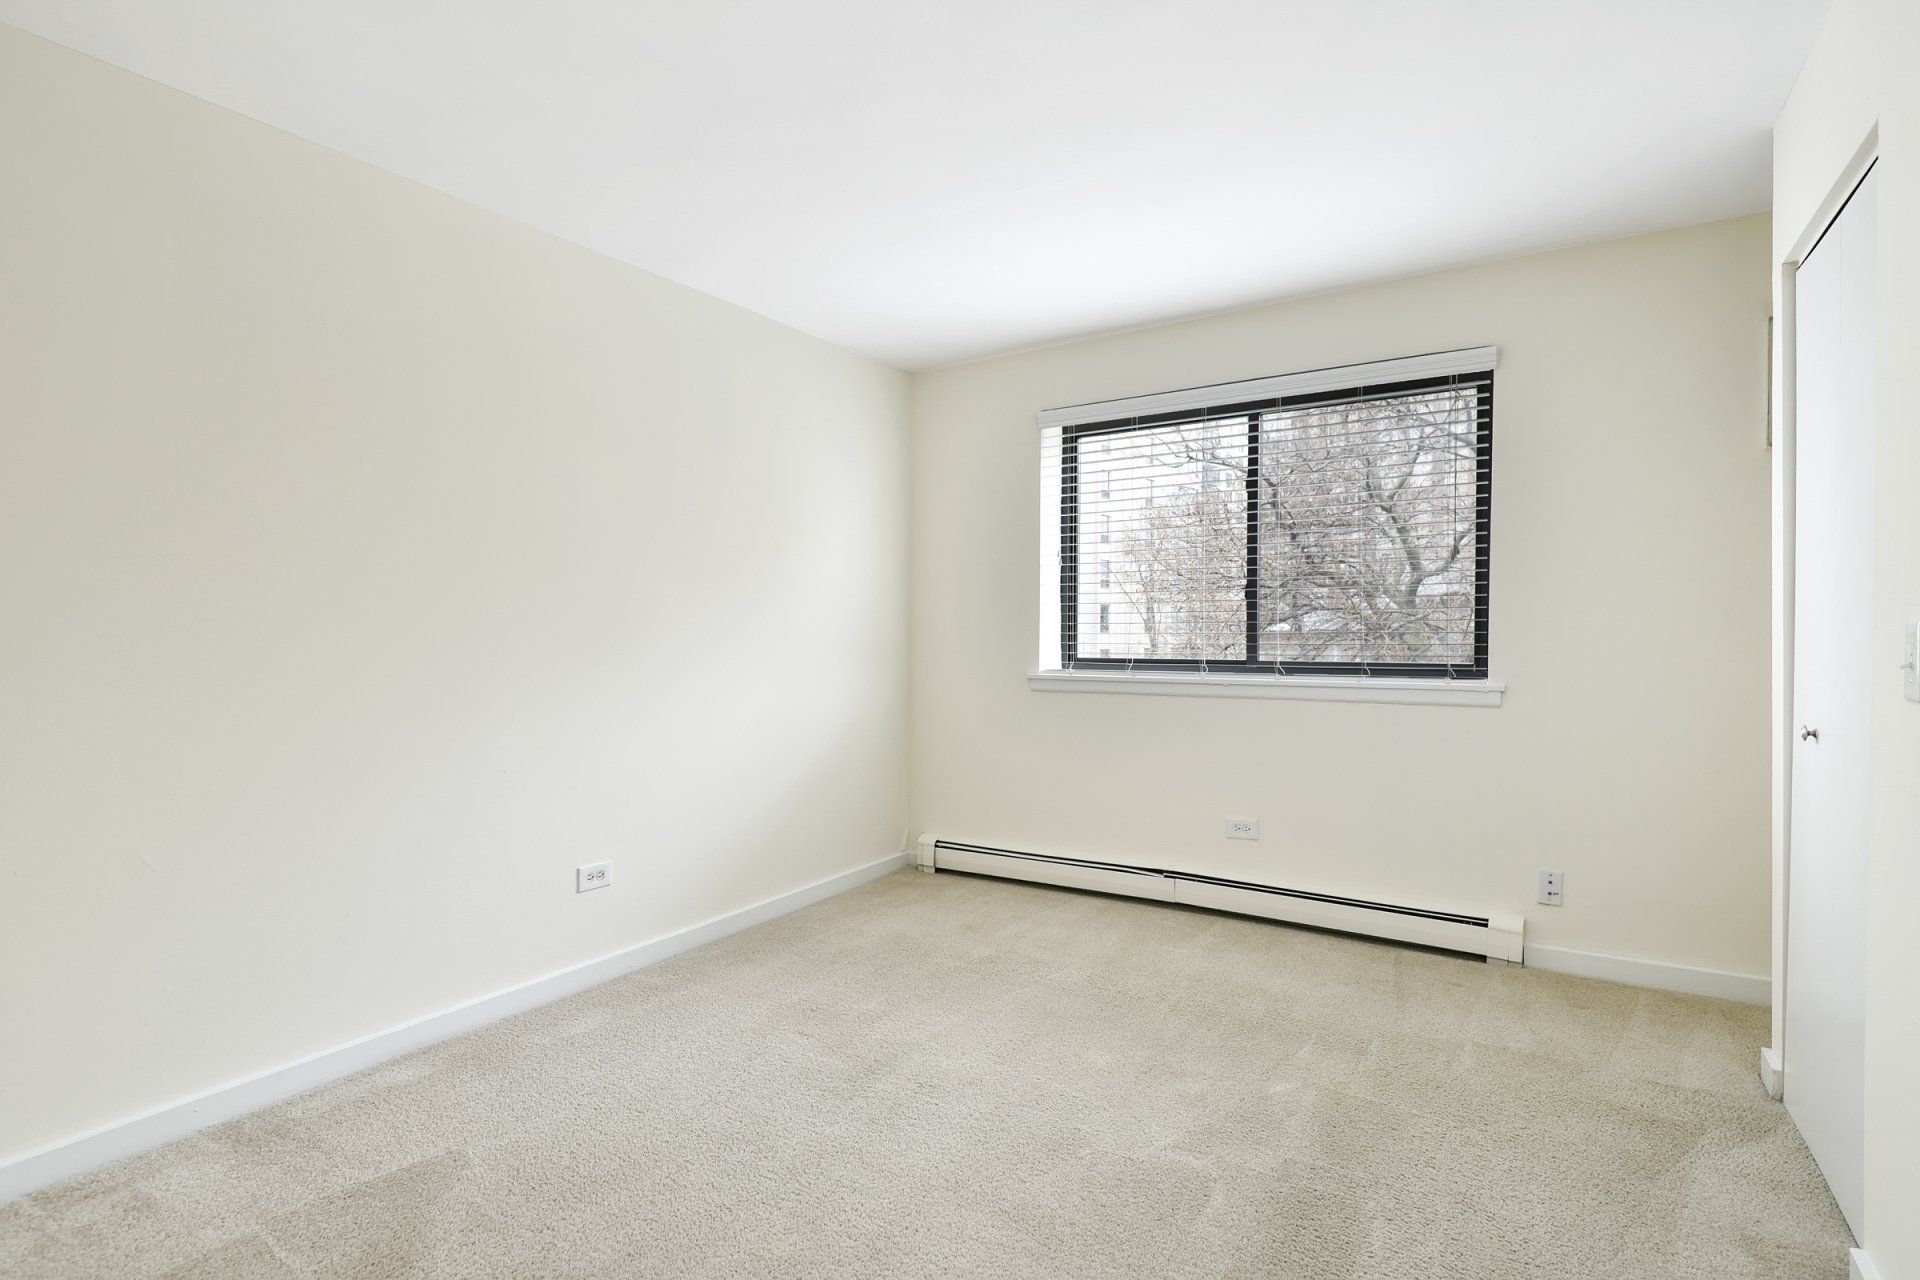 Empty bedroom with carpeted floor at Reside on Stratford.